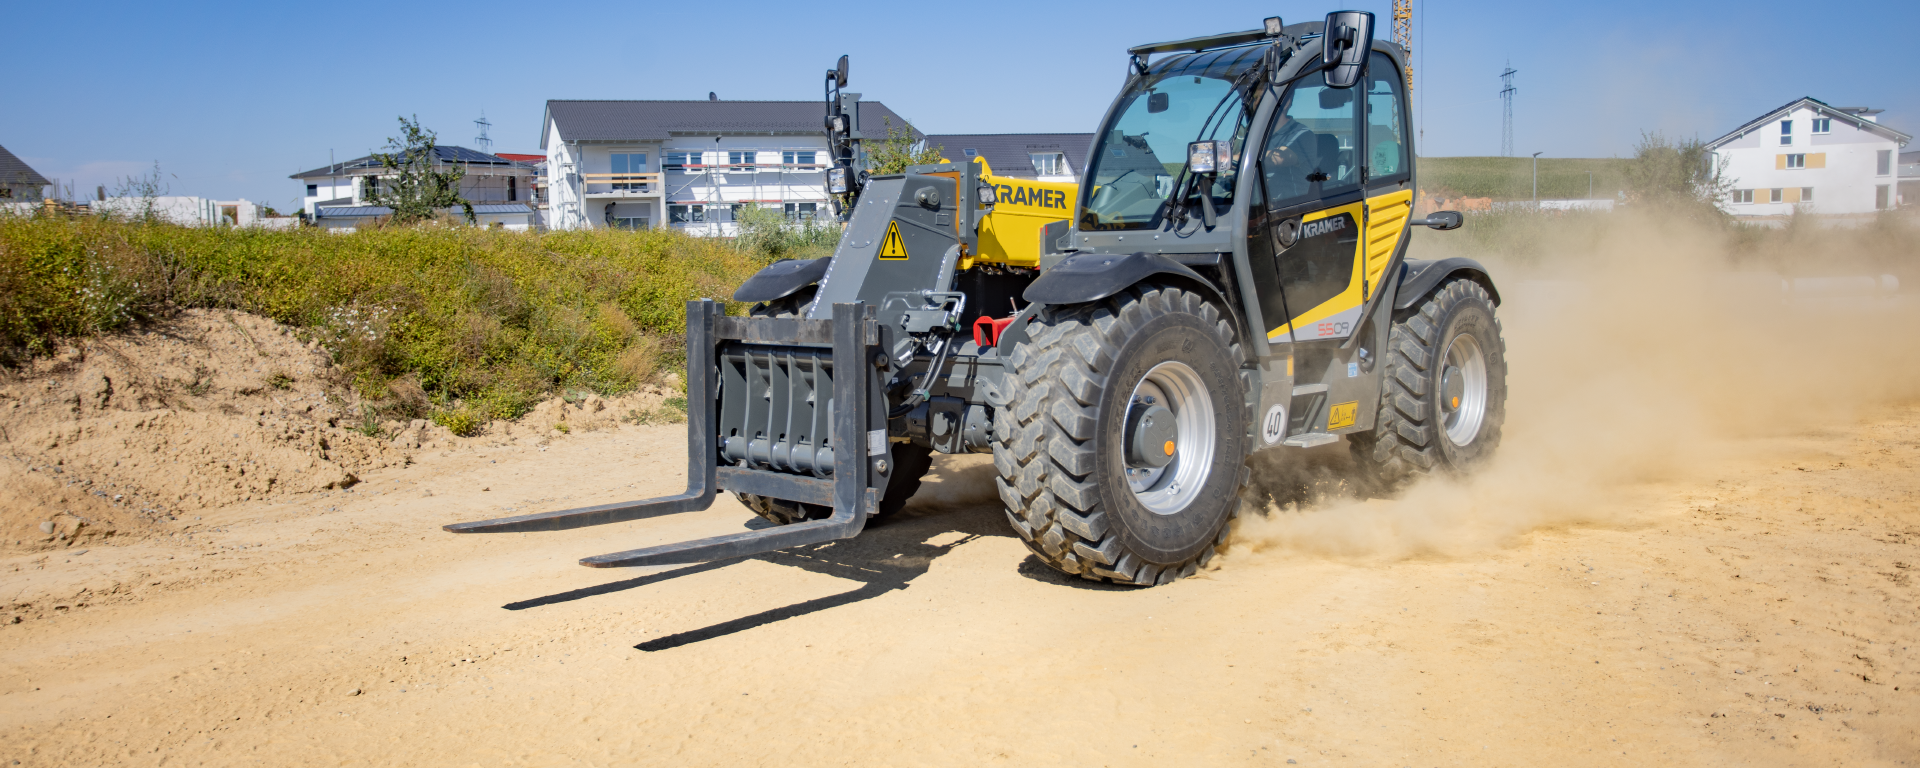 The Kramer telehandler 5509 while working on a construction site.